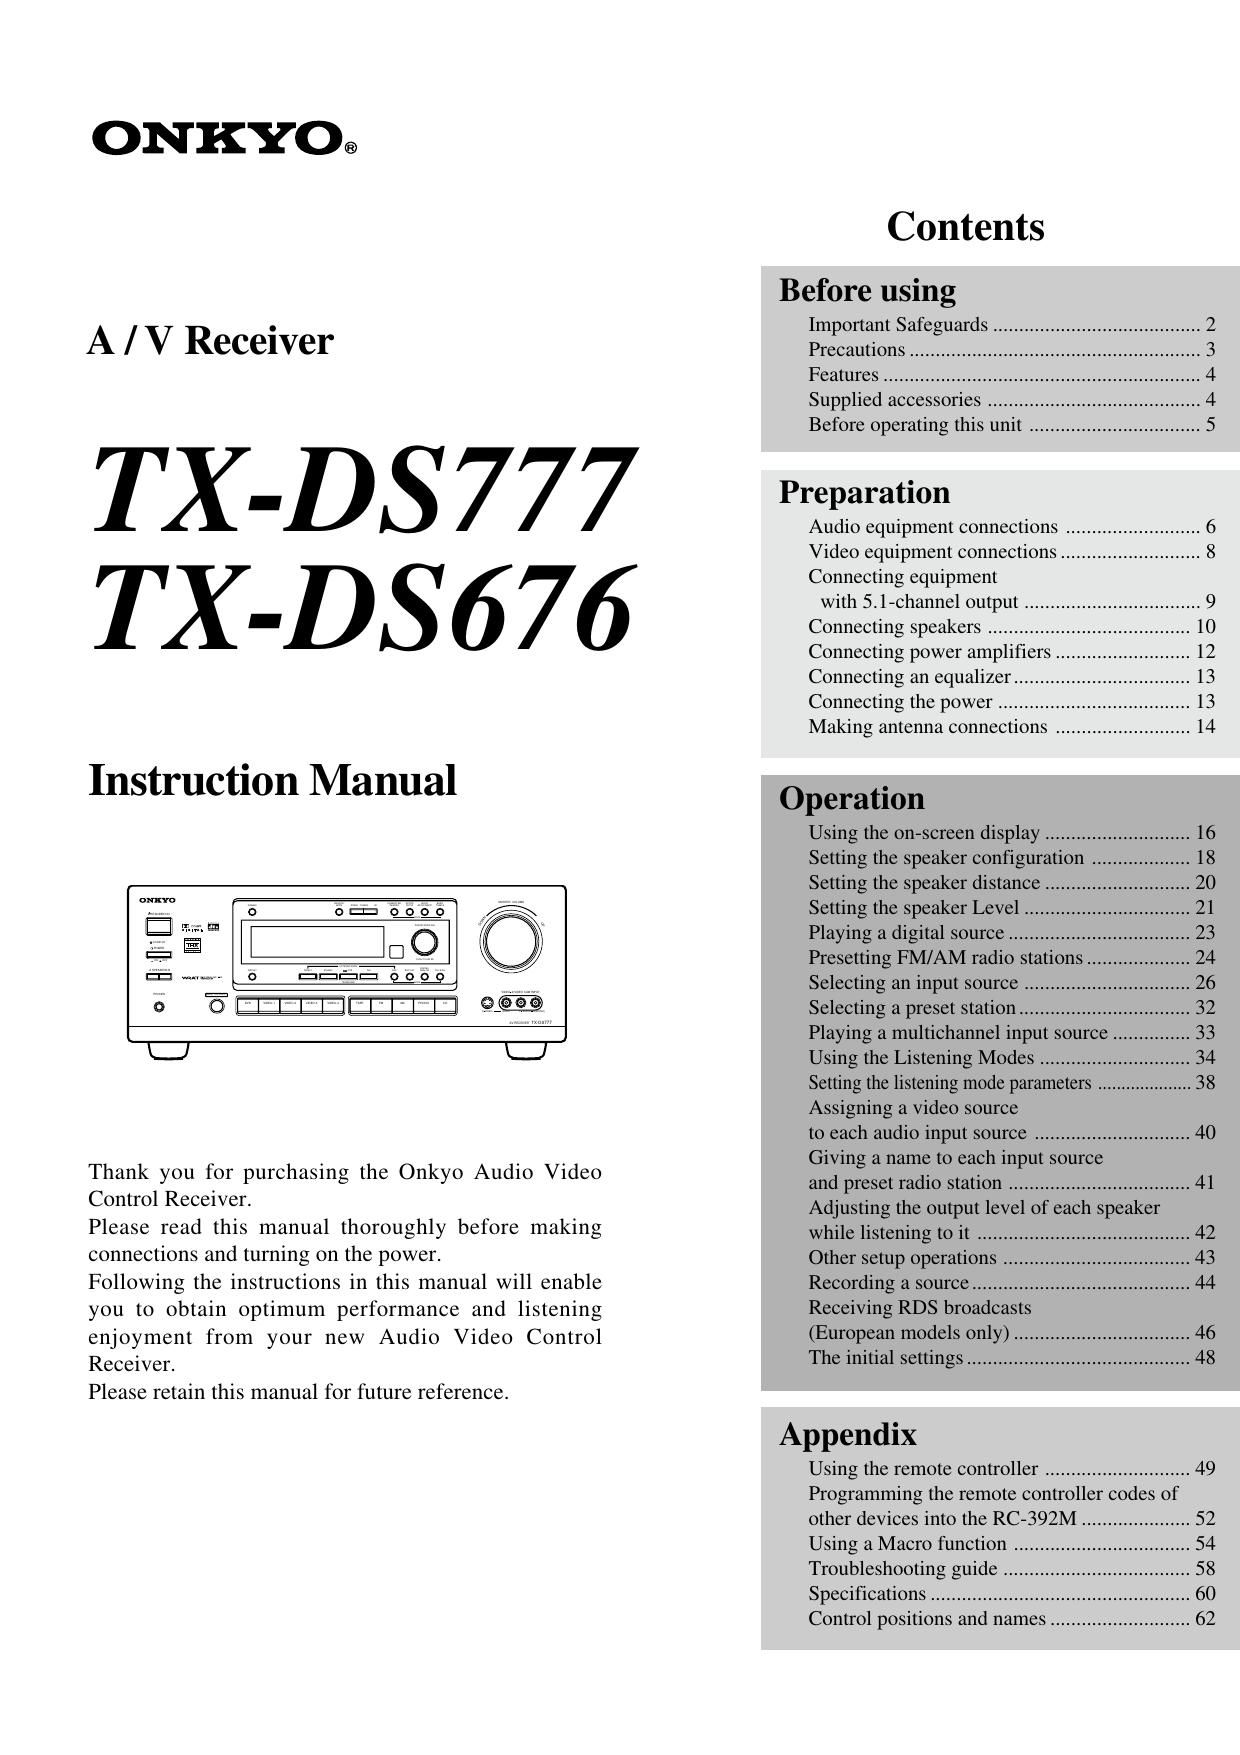 Onkyo TXDS 676 Owners Manual